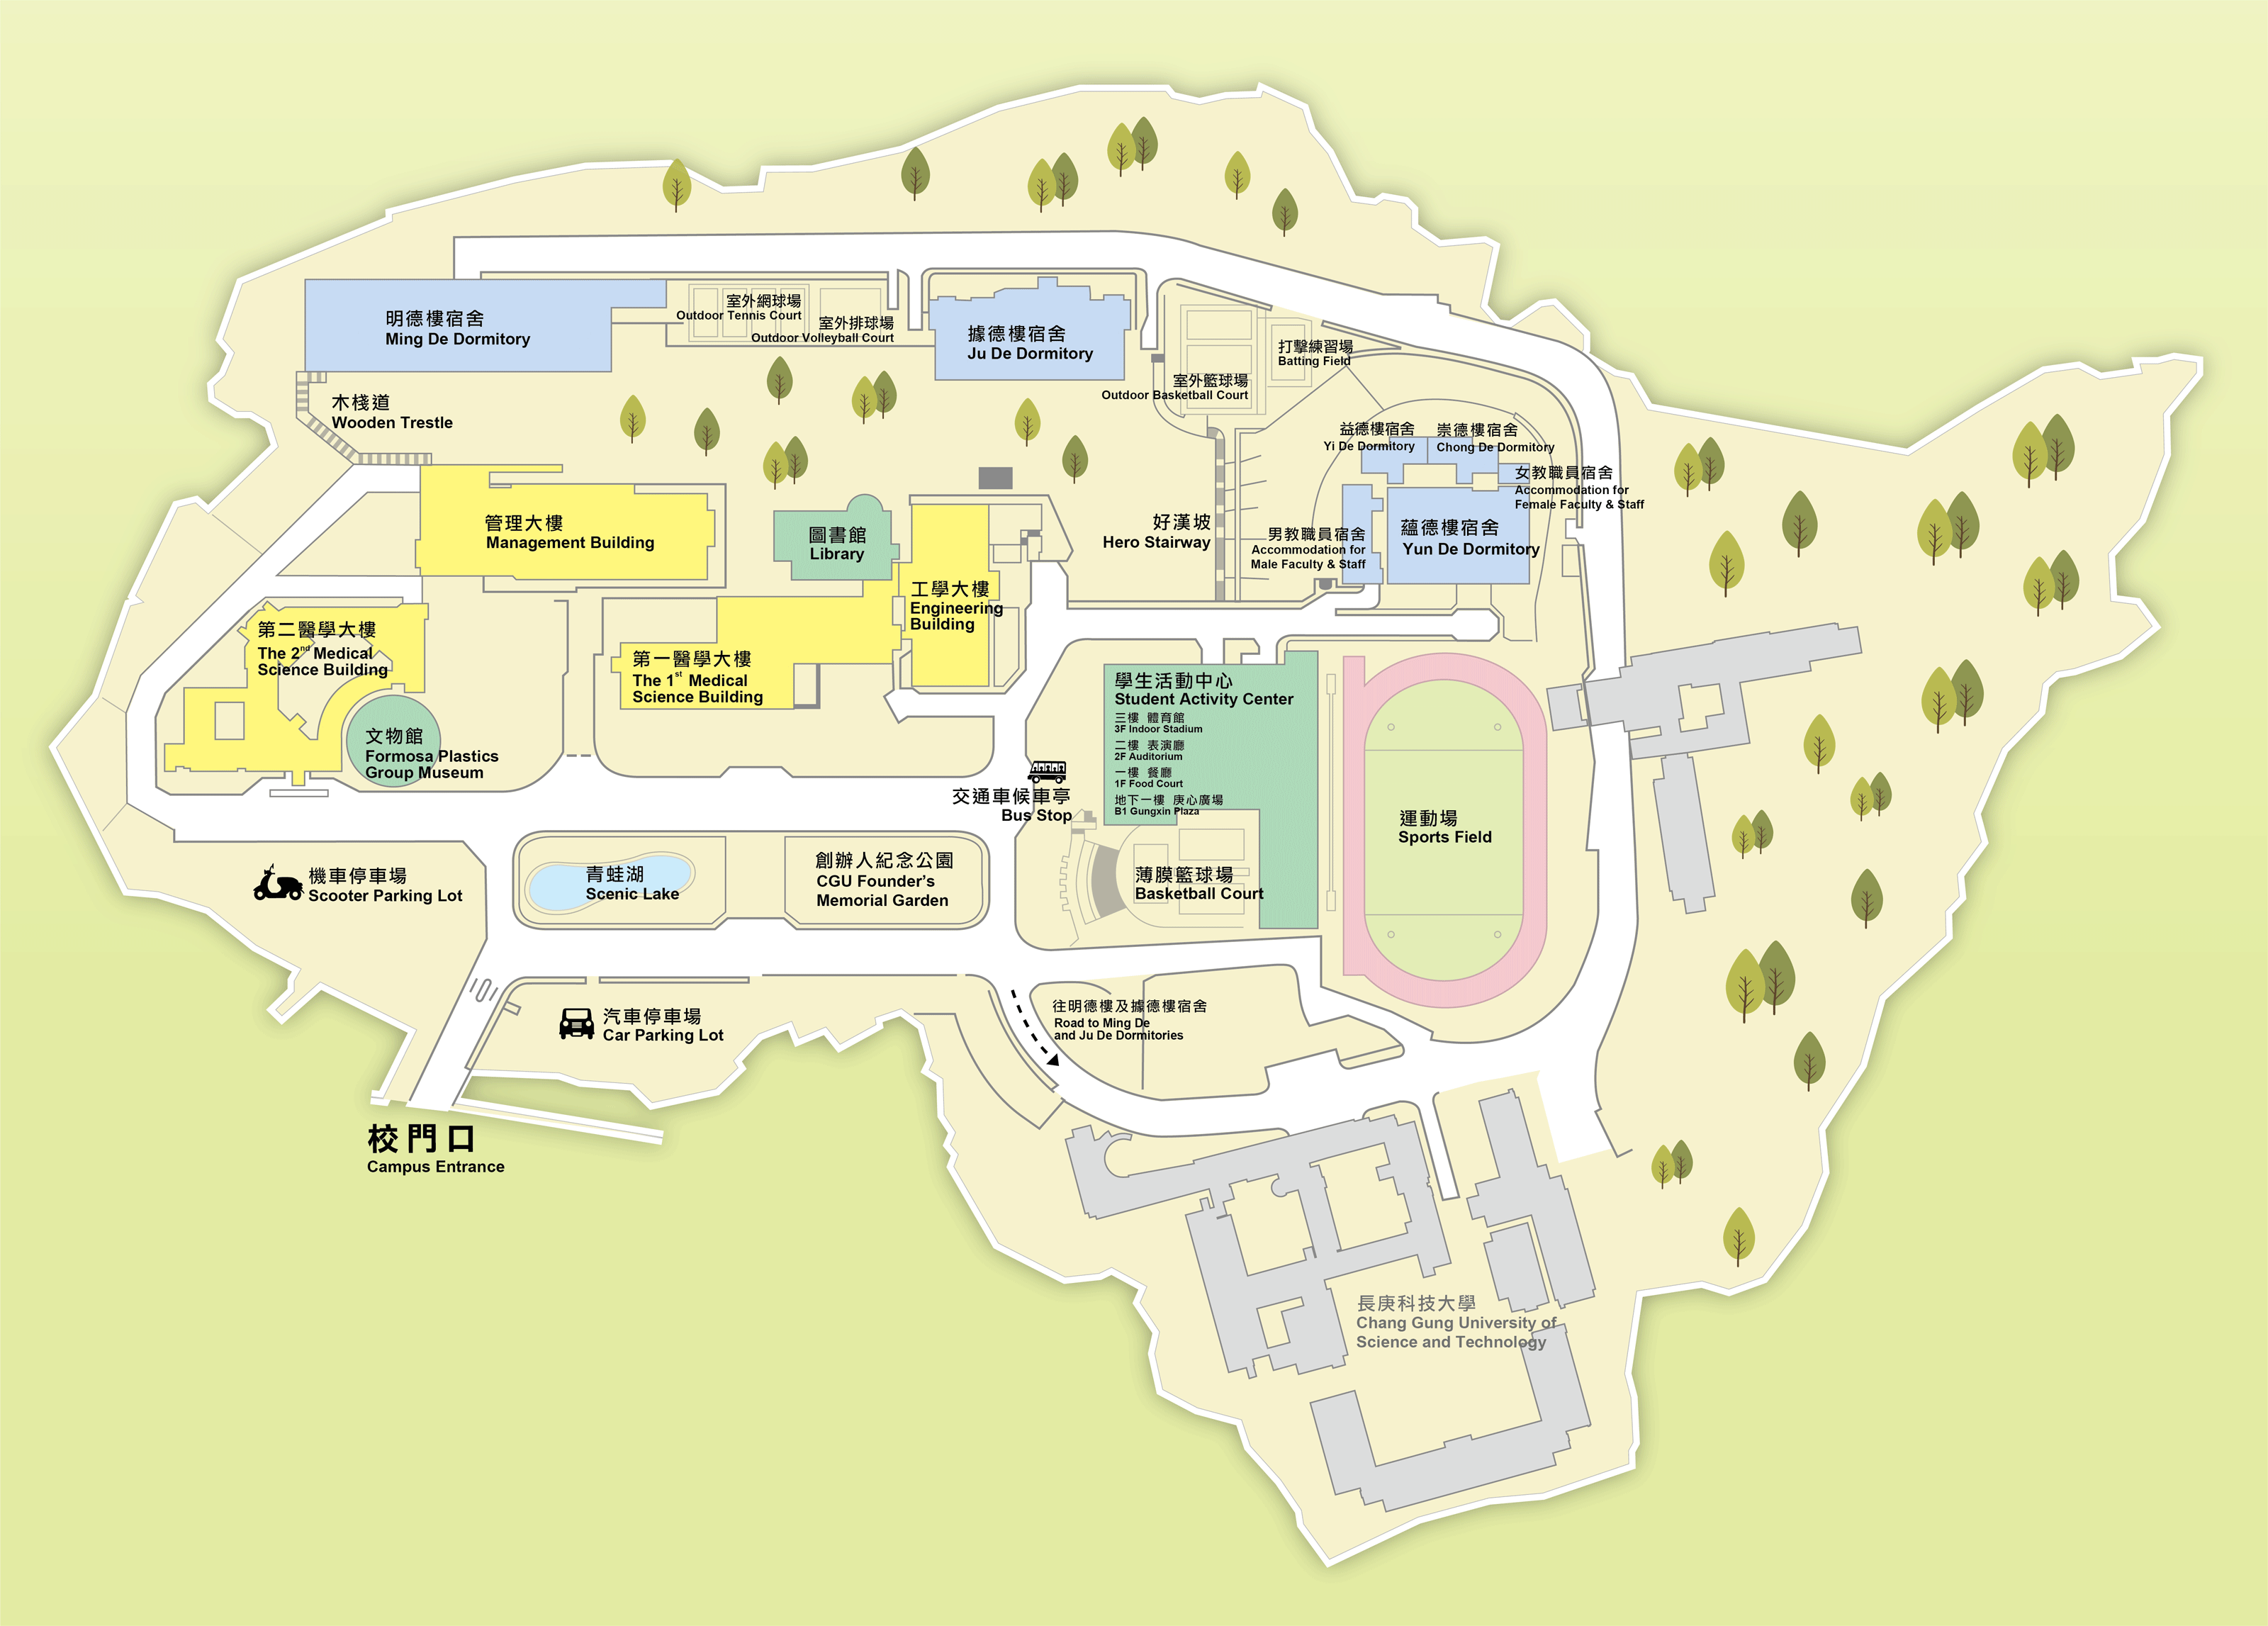 The Layout of the University Compound